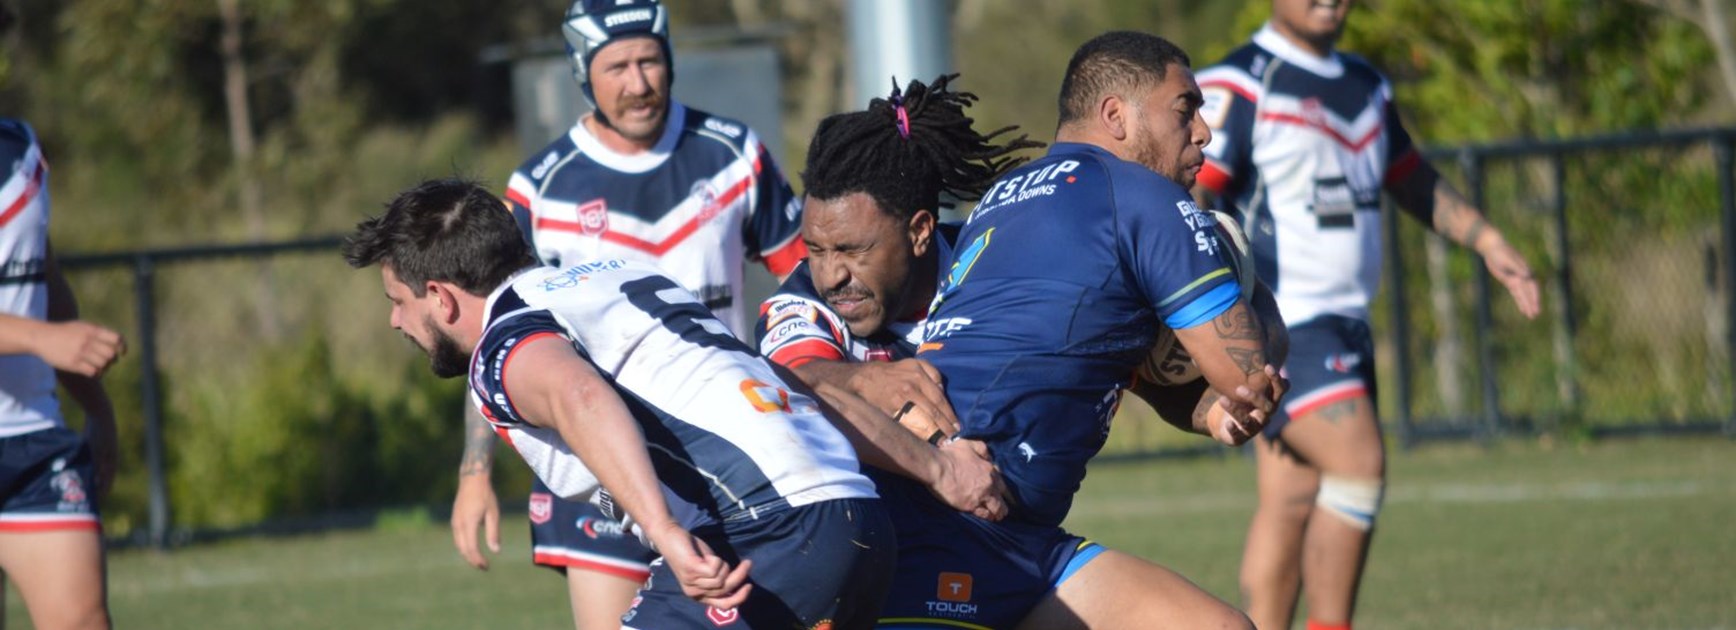 RLB Opens wrap: Clinical Kangaroos clip Roosters wings